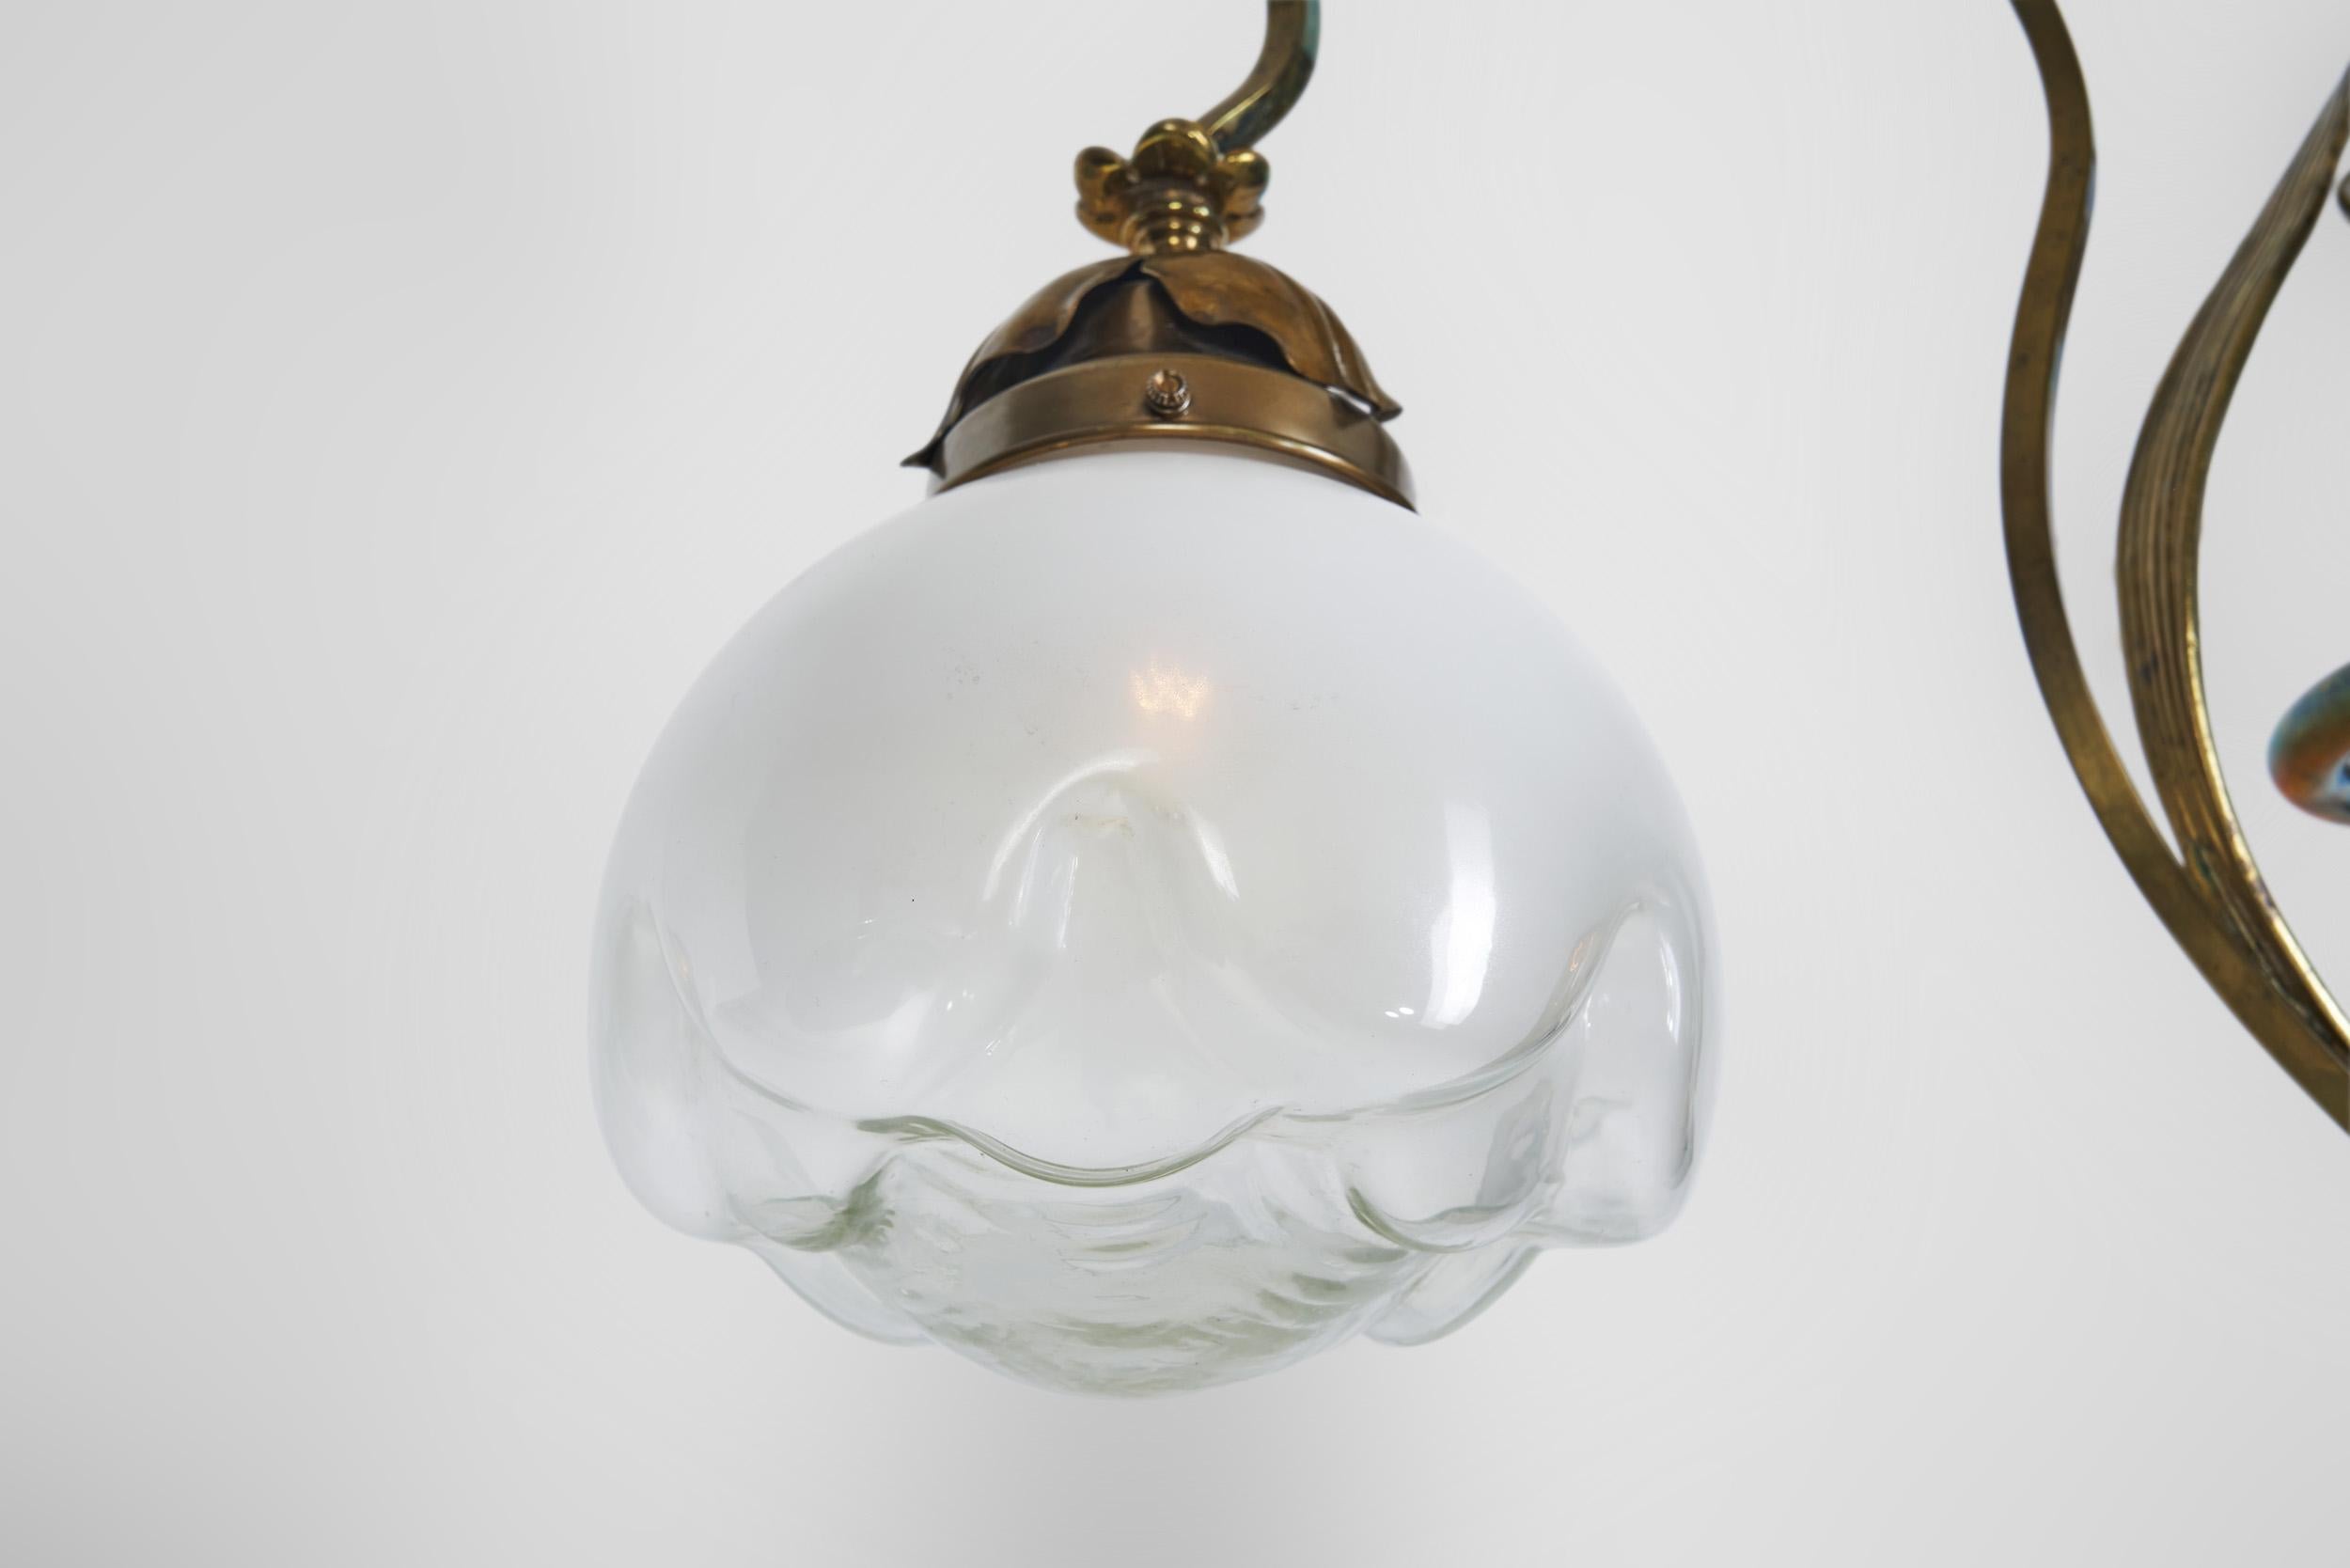 Jugend Ceiling Lamp in Patinated Brass and Glass, Europe early 20th century For Sale 6